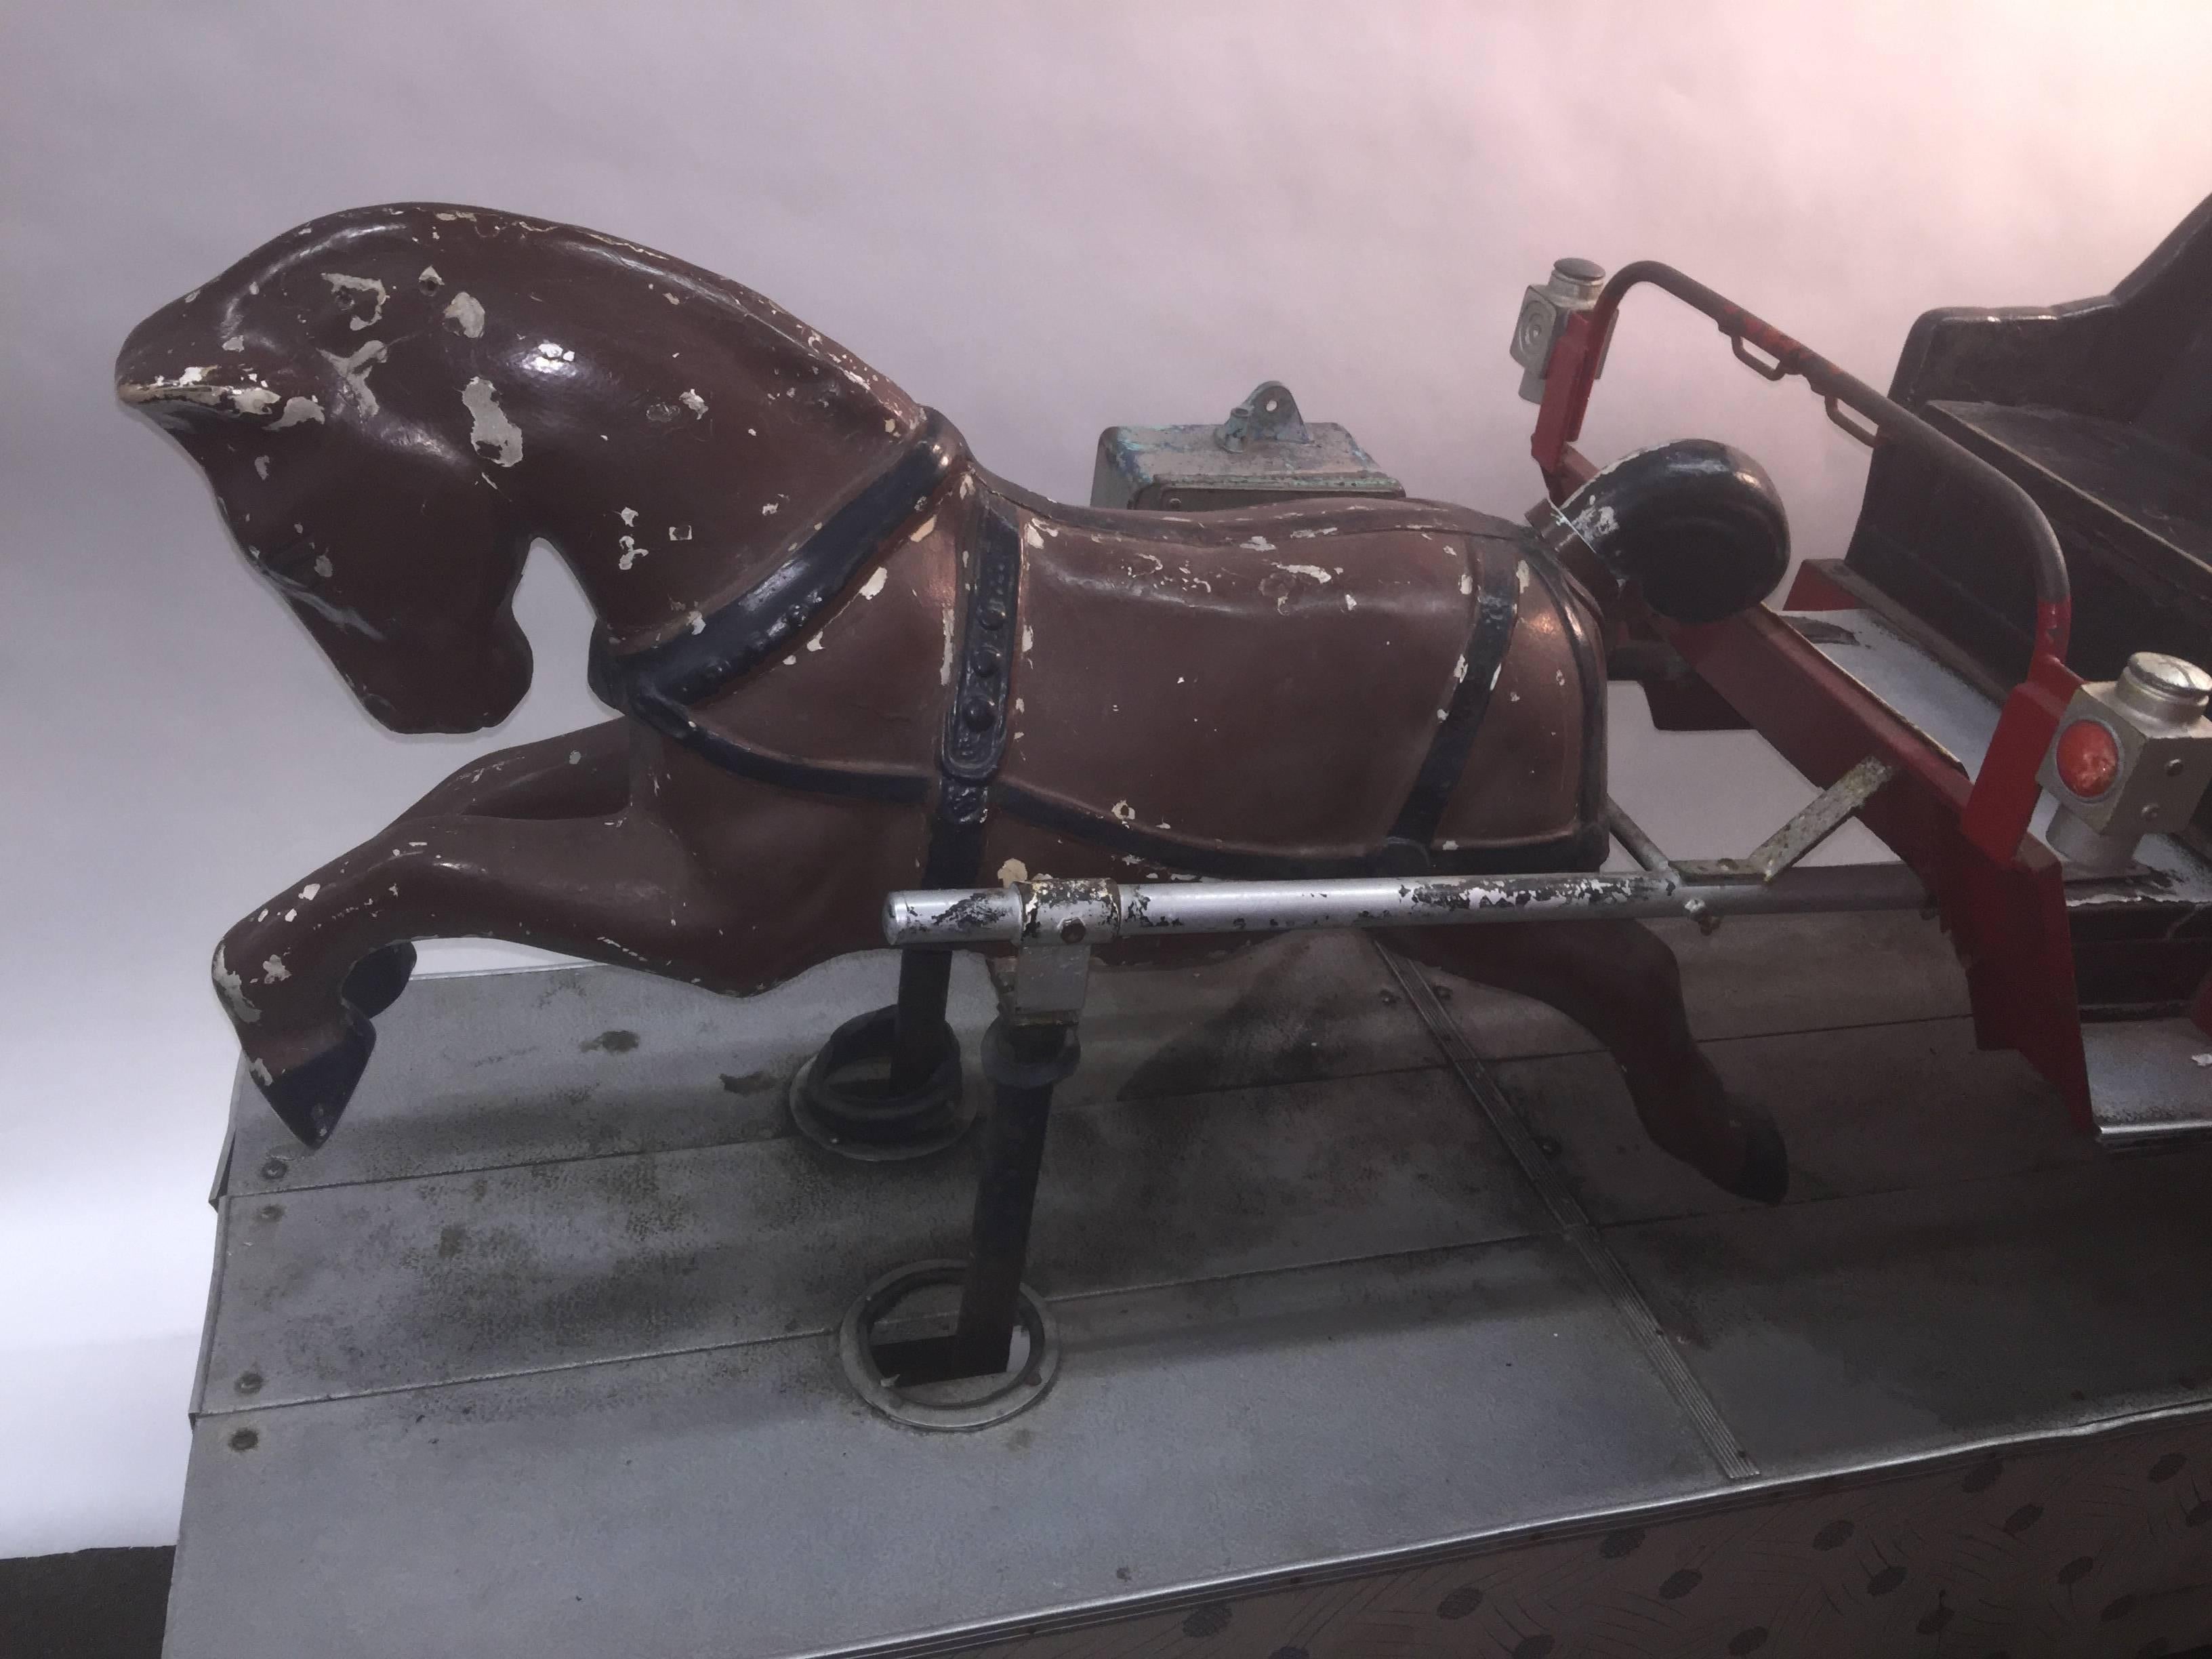 A really cool automated ride circa 1940s-1960s depicting a horse pulling a seated carriage with a water tank attached that firemen used back in the Day. Working and operational, meaning you can take a ride on the undulating seat, this can be viewed